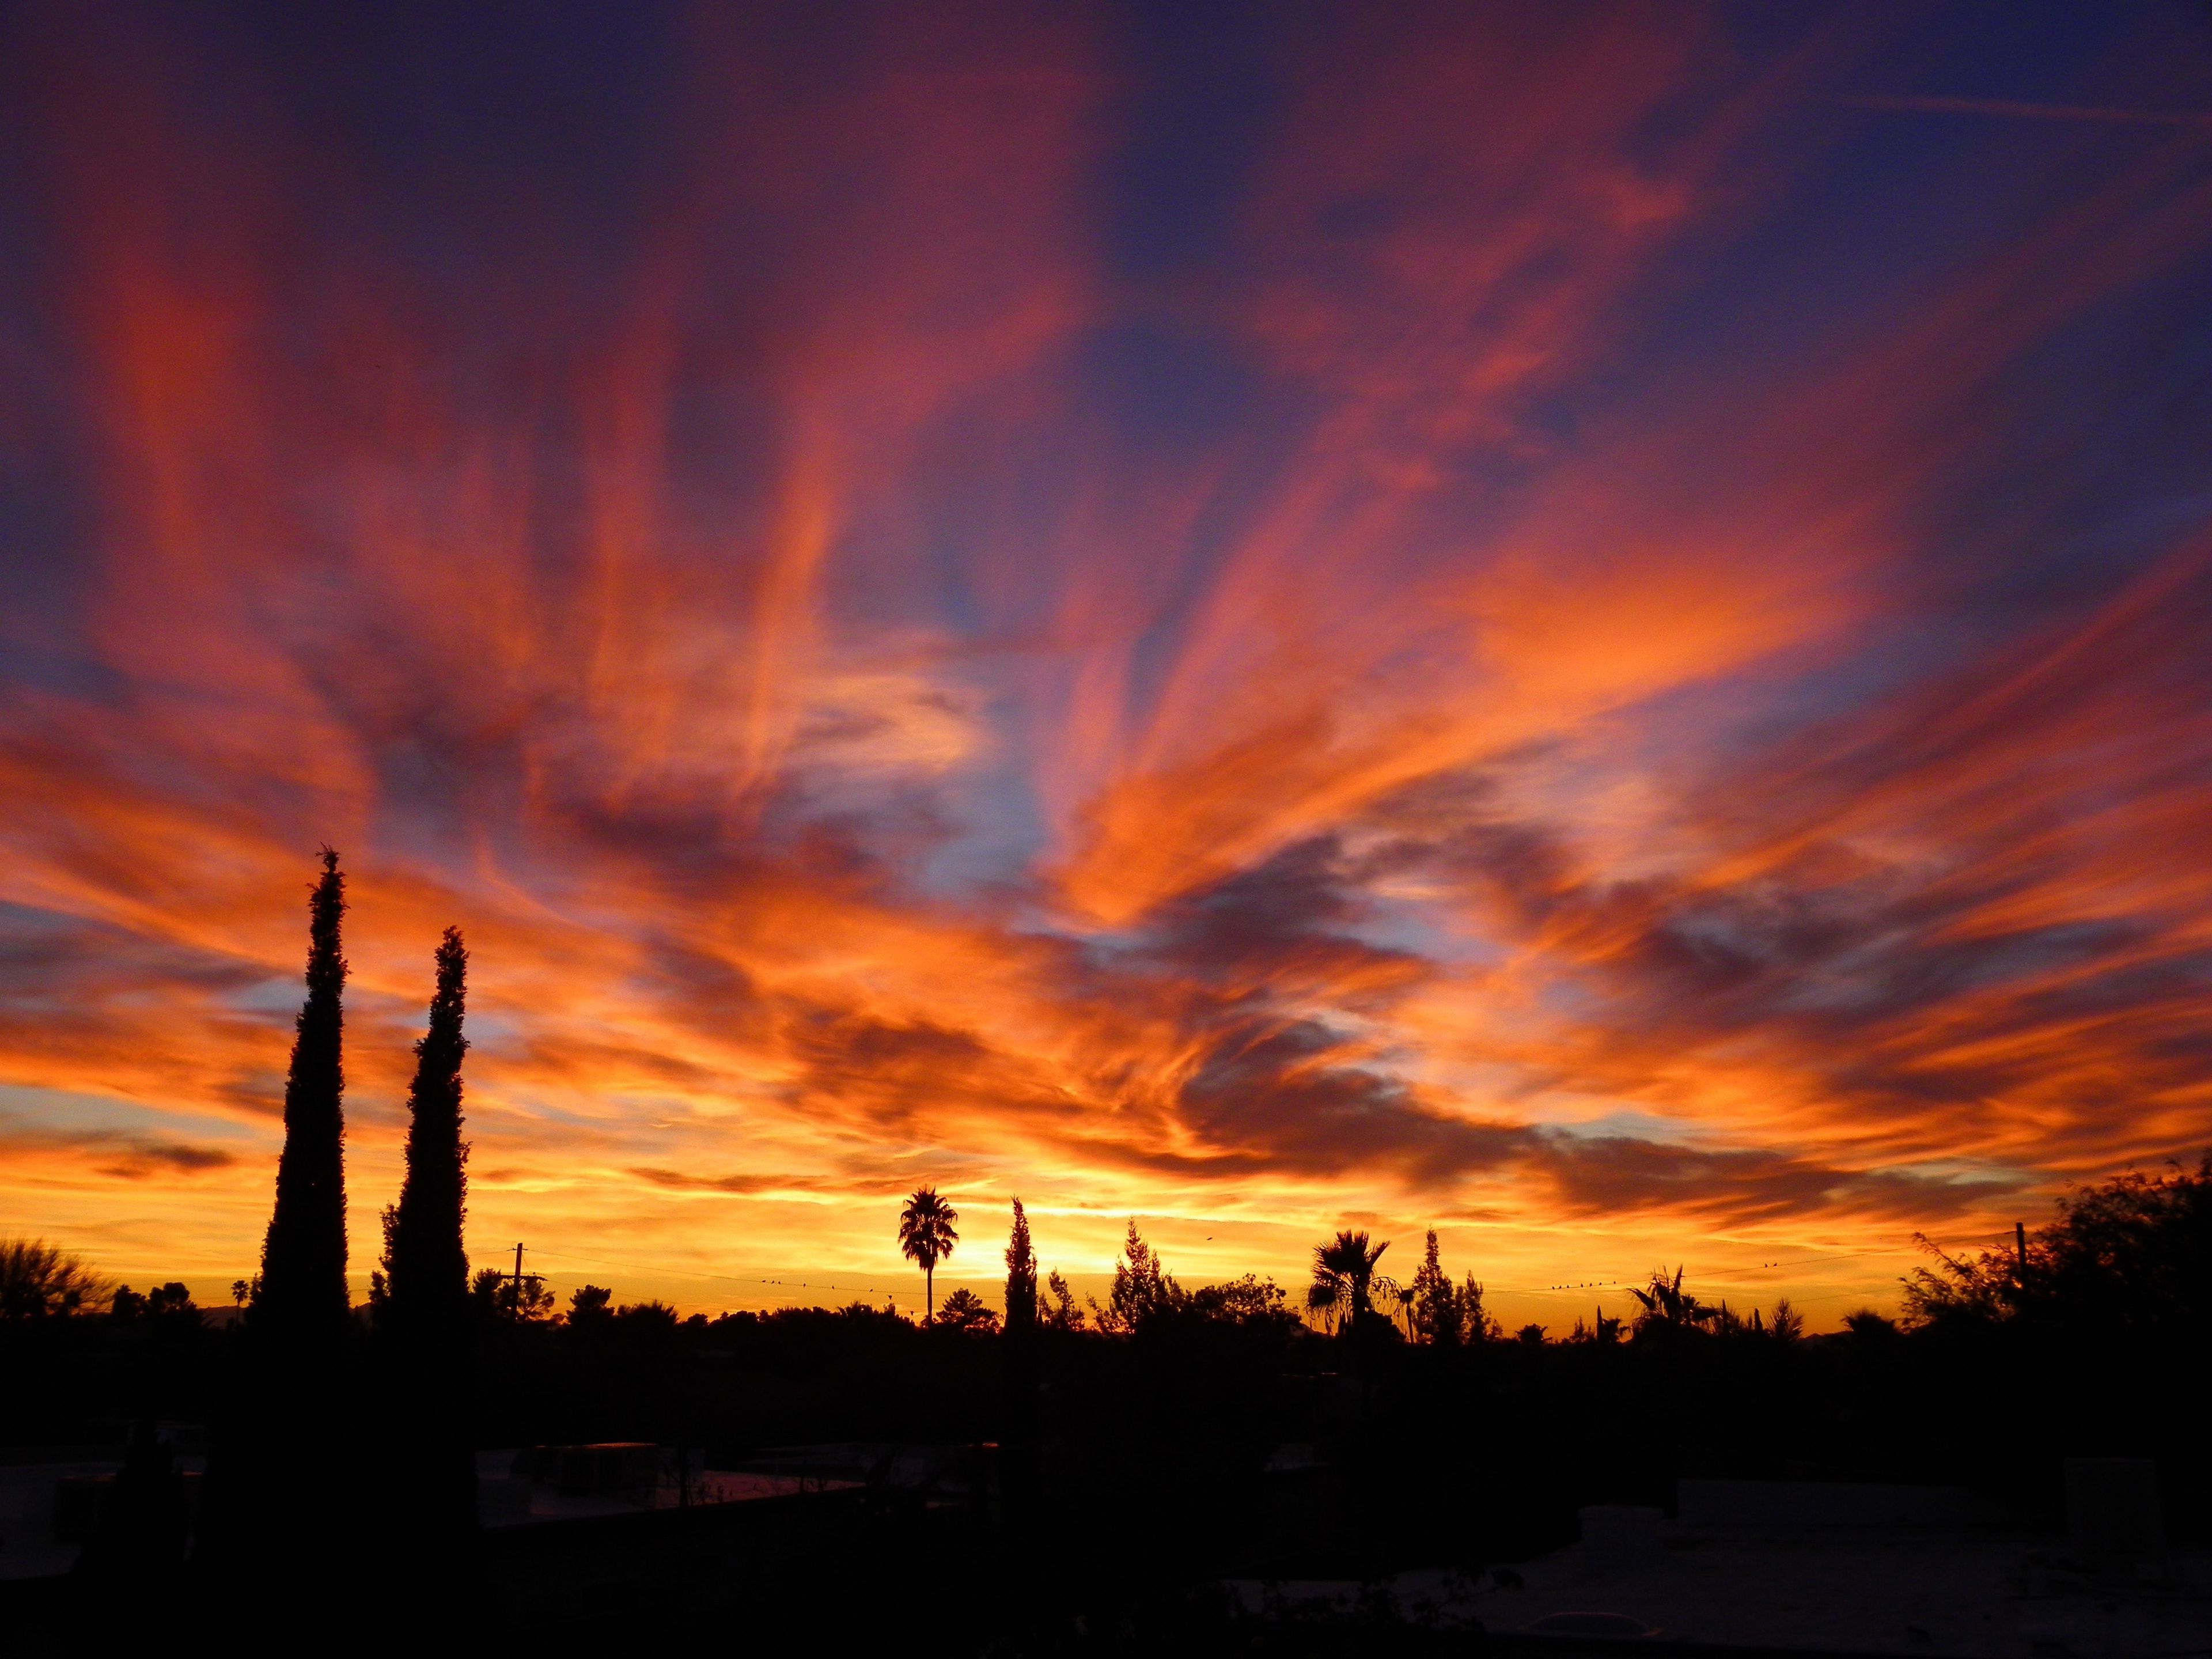 A sunset in Arizona turns clouds orange, yellow, and purple against a darkening blue sky.